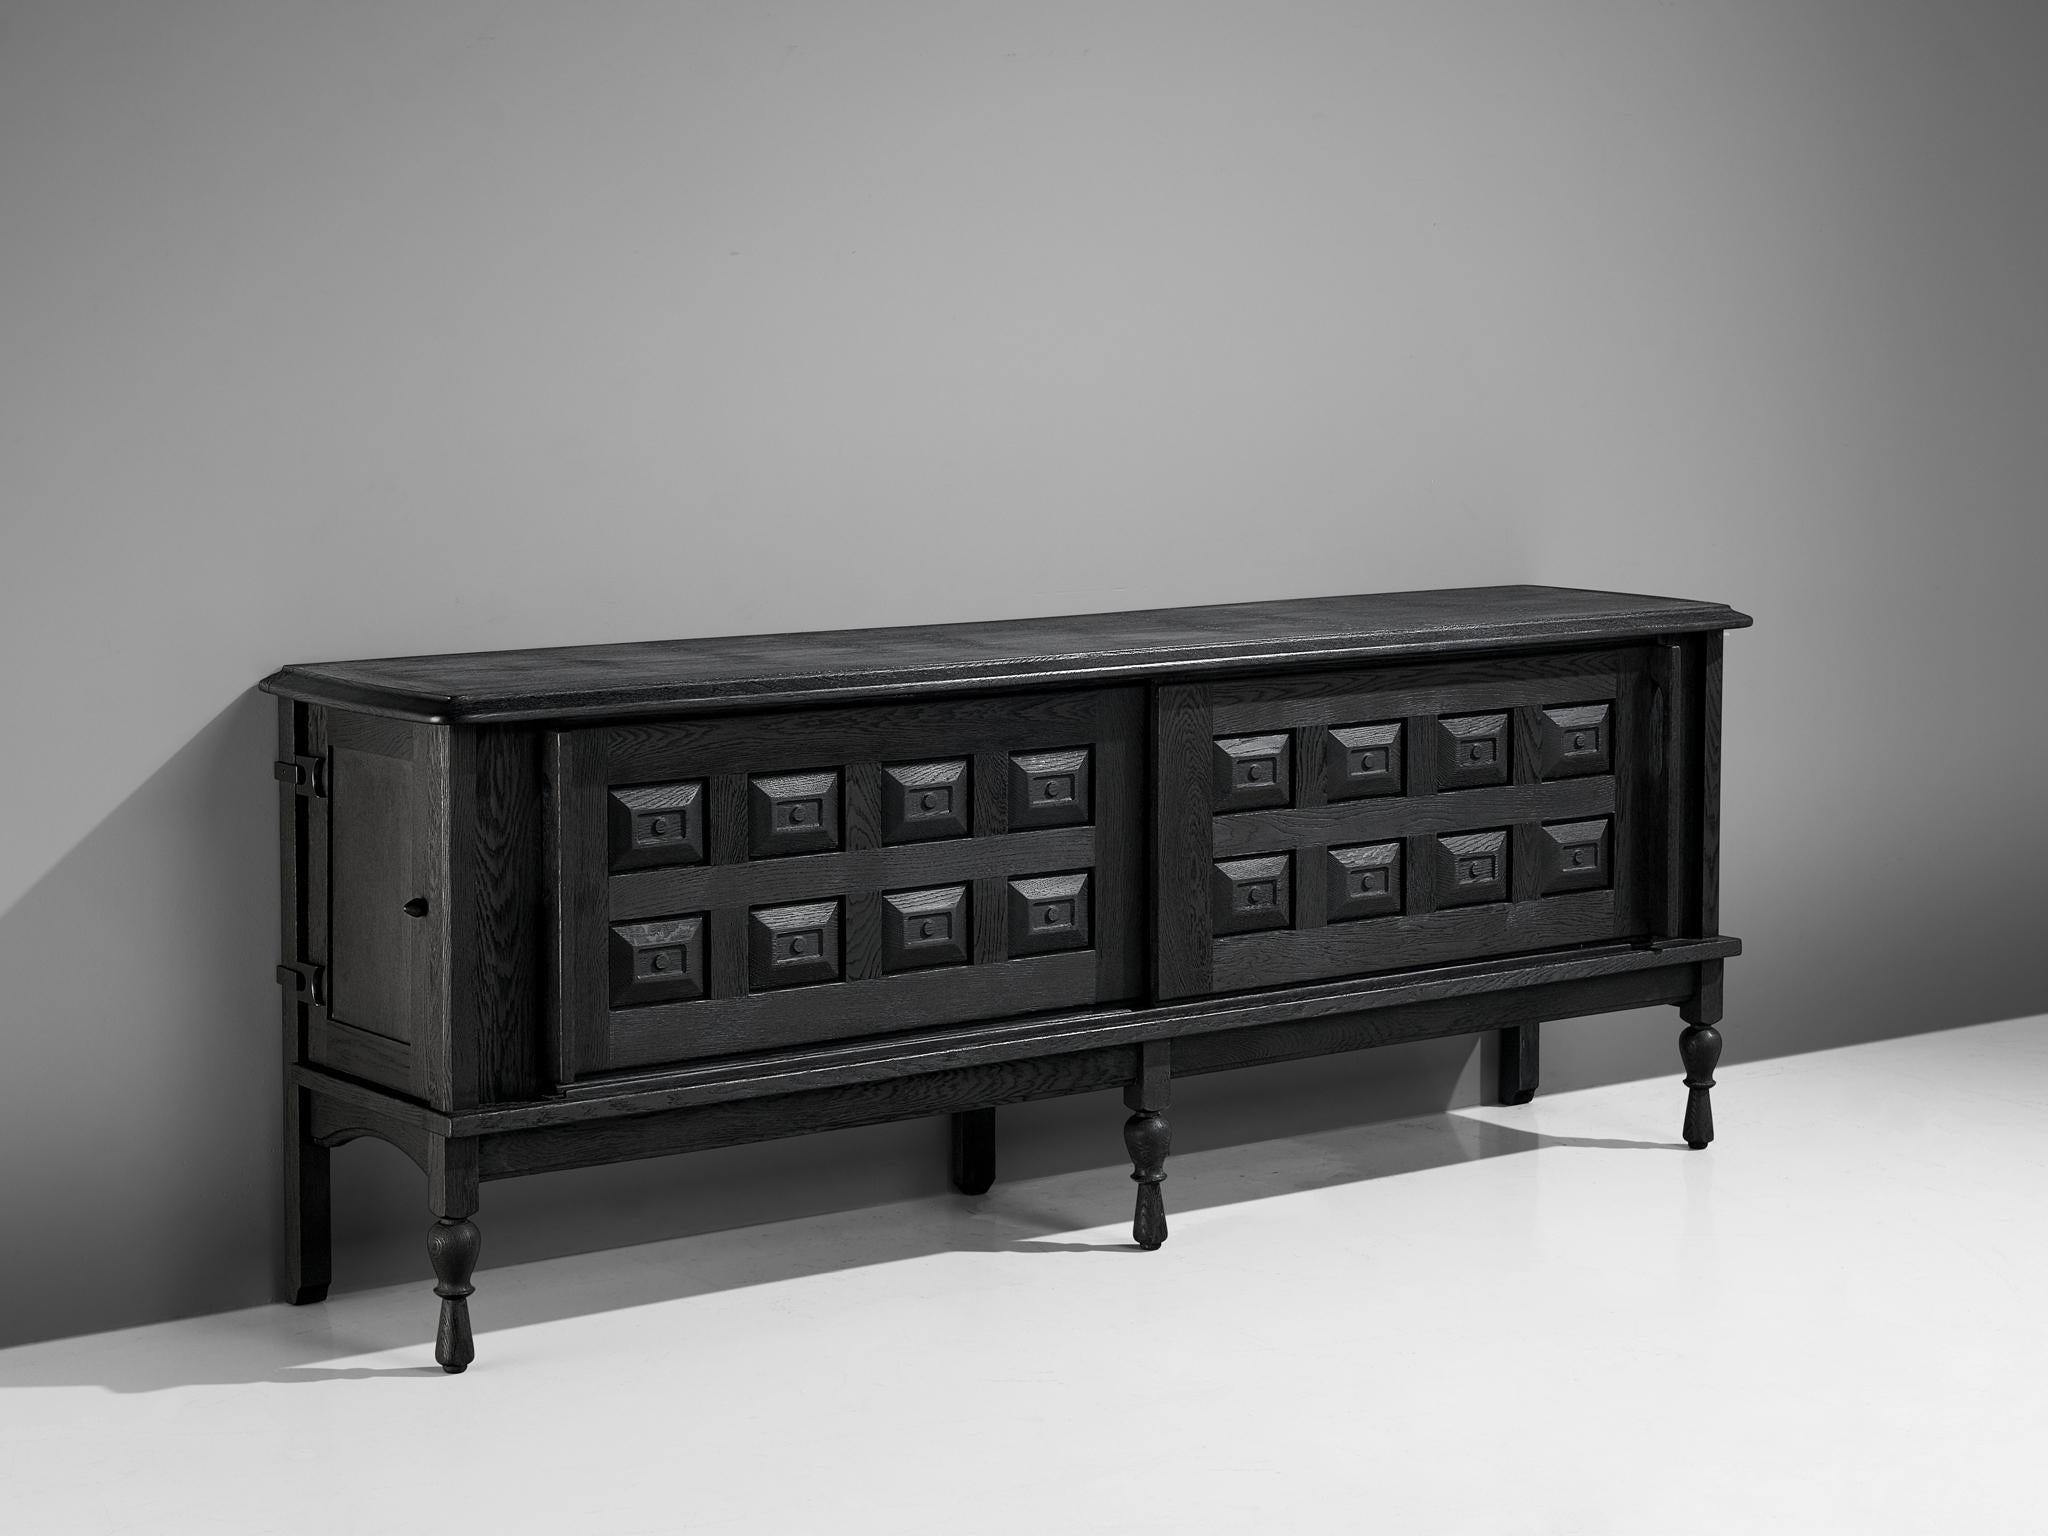 Guillerme et Chambron for Votre Maison, credenza, in black oak, France, 1960s.

Characteristic sideboard in ebonized solid oak. This cabinet holds all the characteristics of the French designer duo Jacques Chambron and Robert Guillerme. As many of